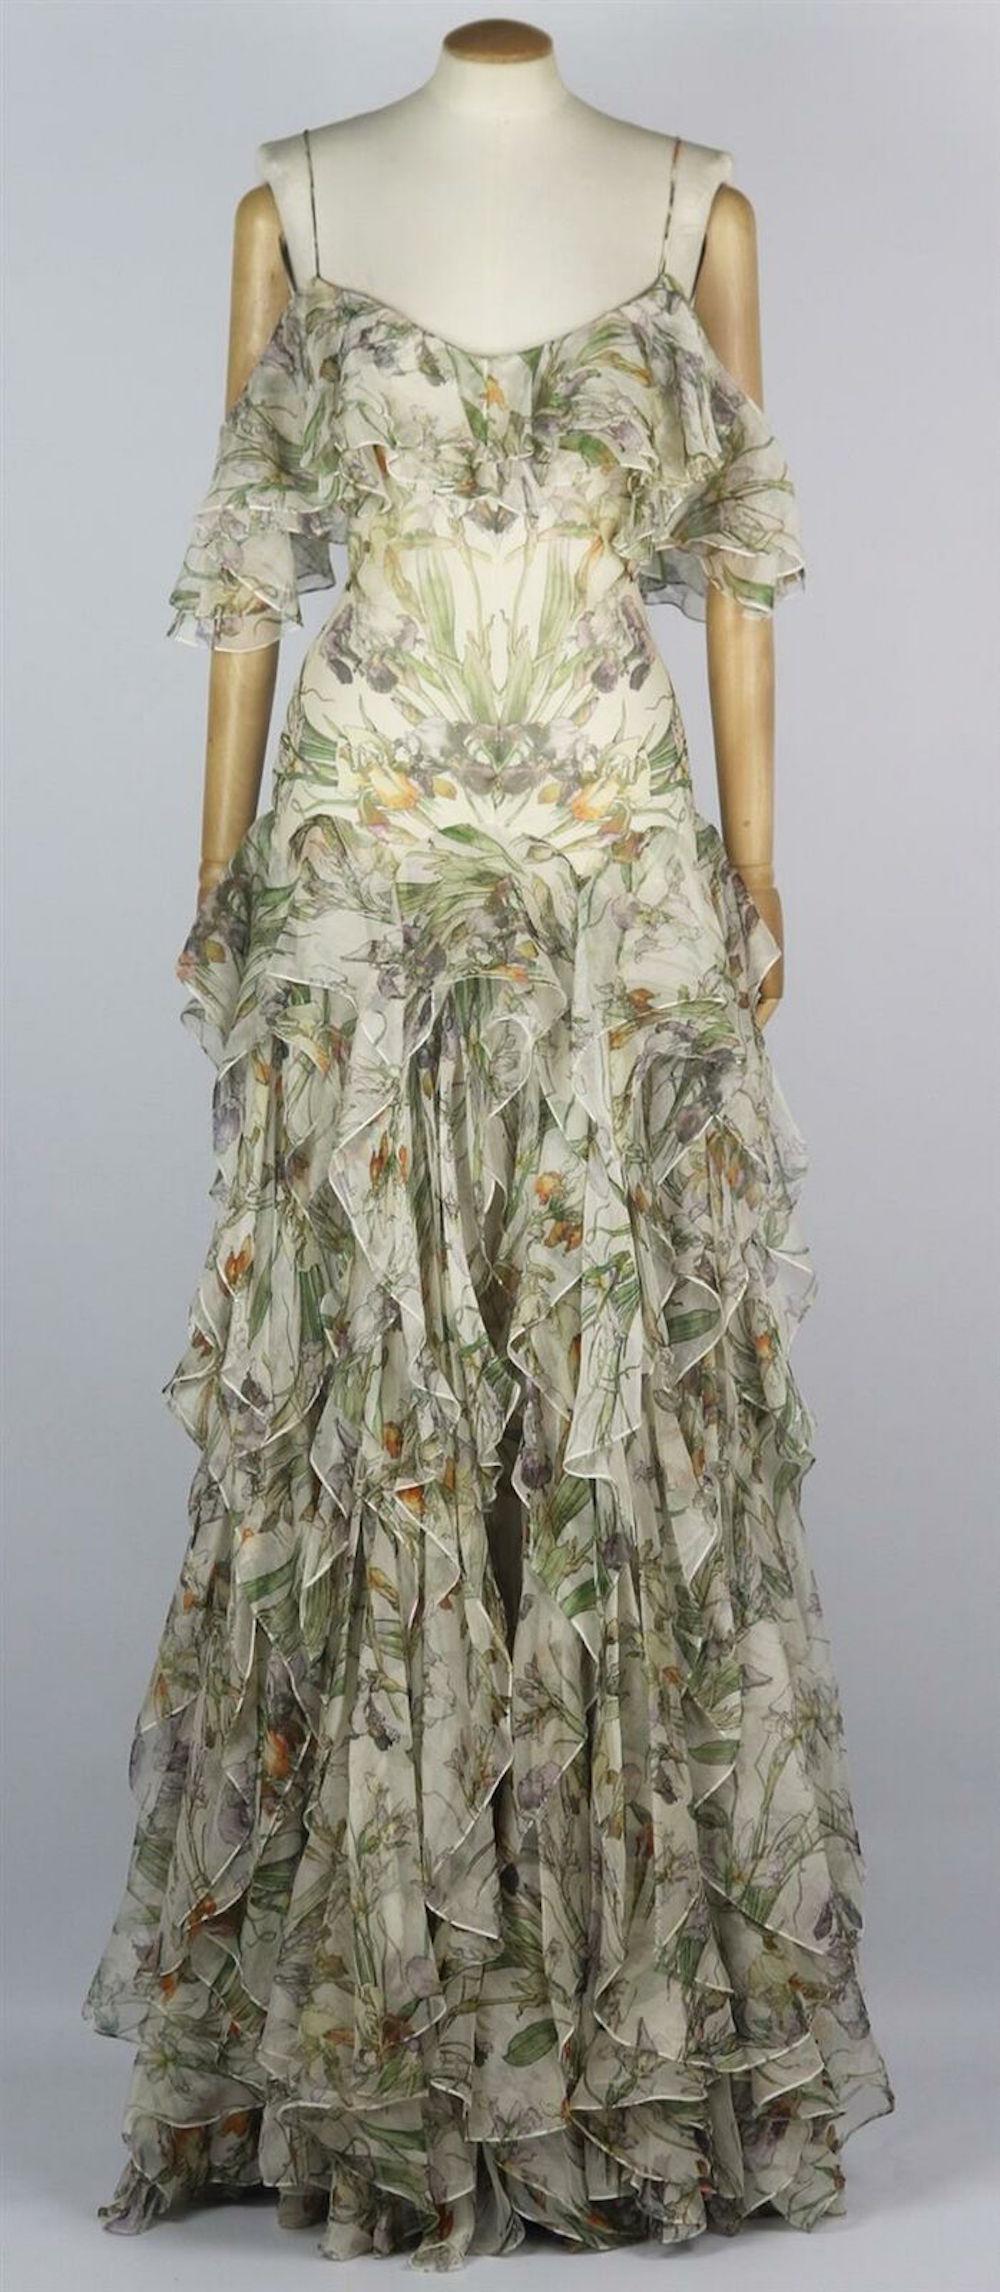 This Alexander McQueen dress is filled with exaggerated volumes and floral prints, cut from airy silk-georgette, this dress is patterned with beautiful blooms and has a cold-shoulder neckline that's secured by slim straps, it's detailed with ruffled